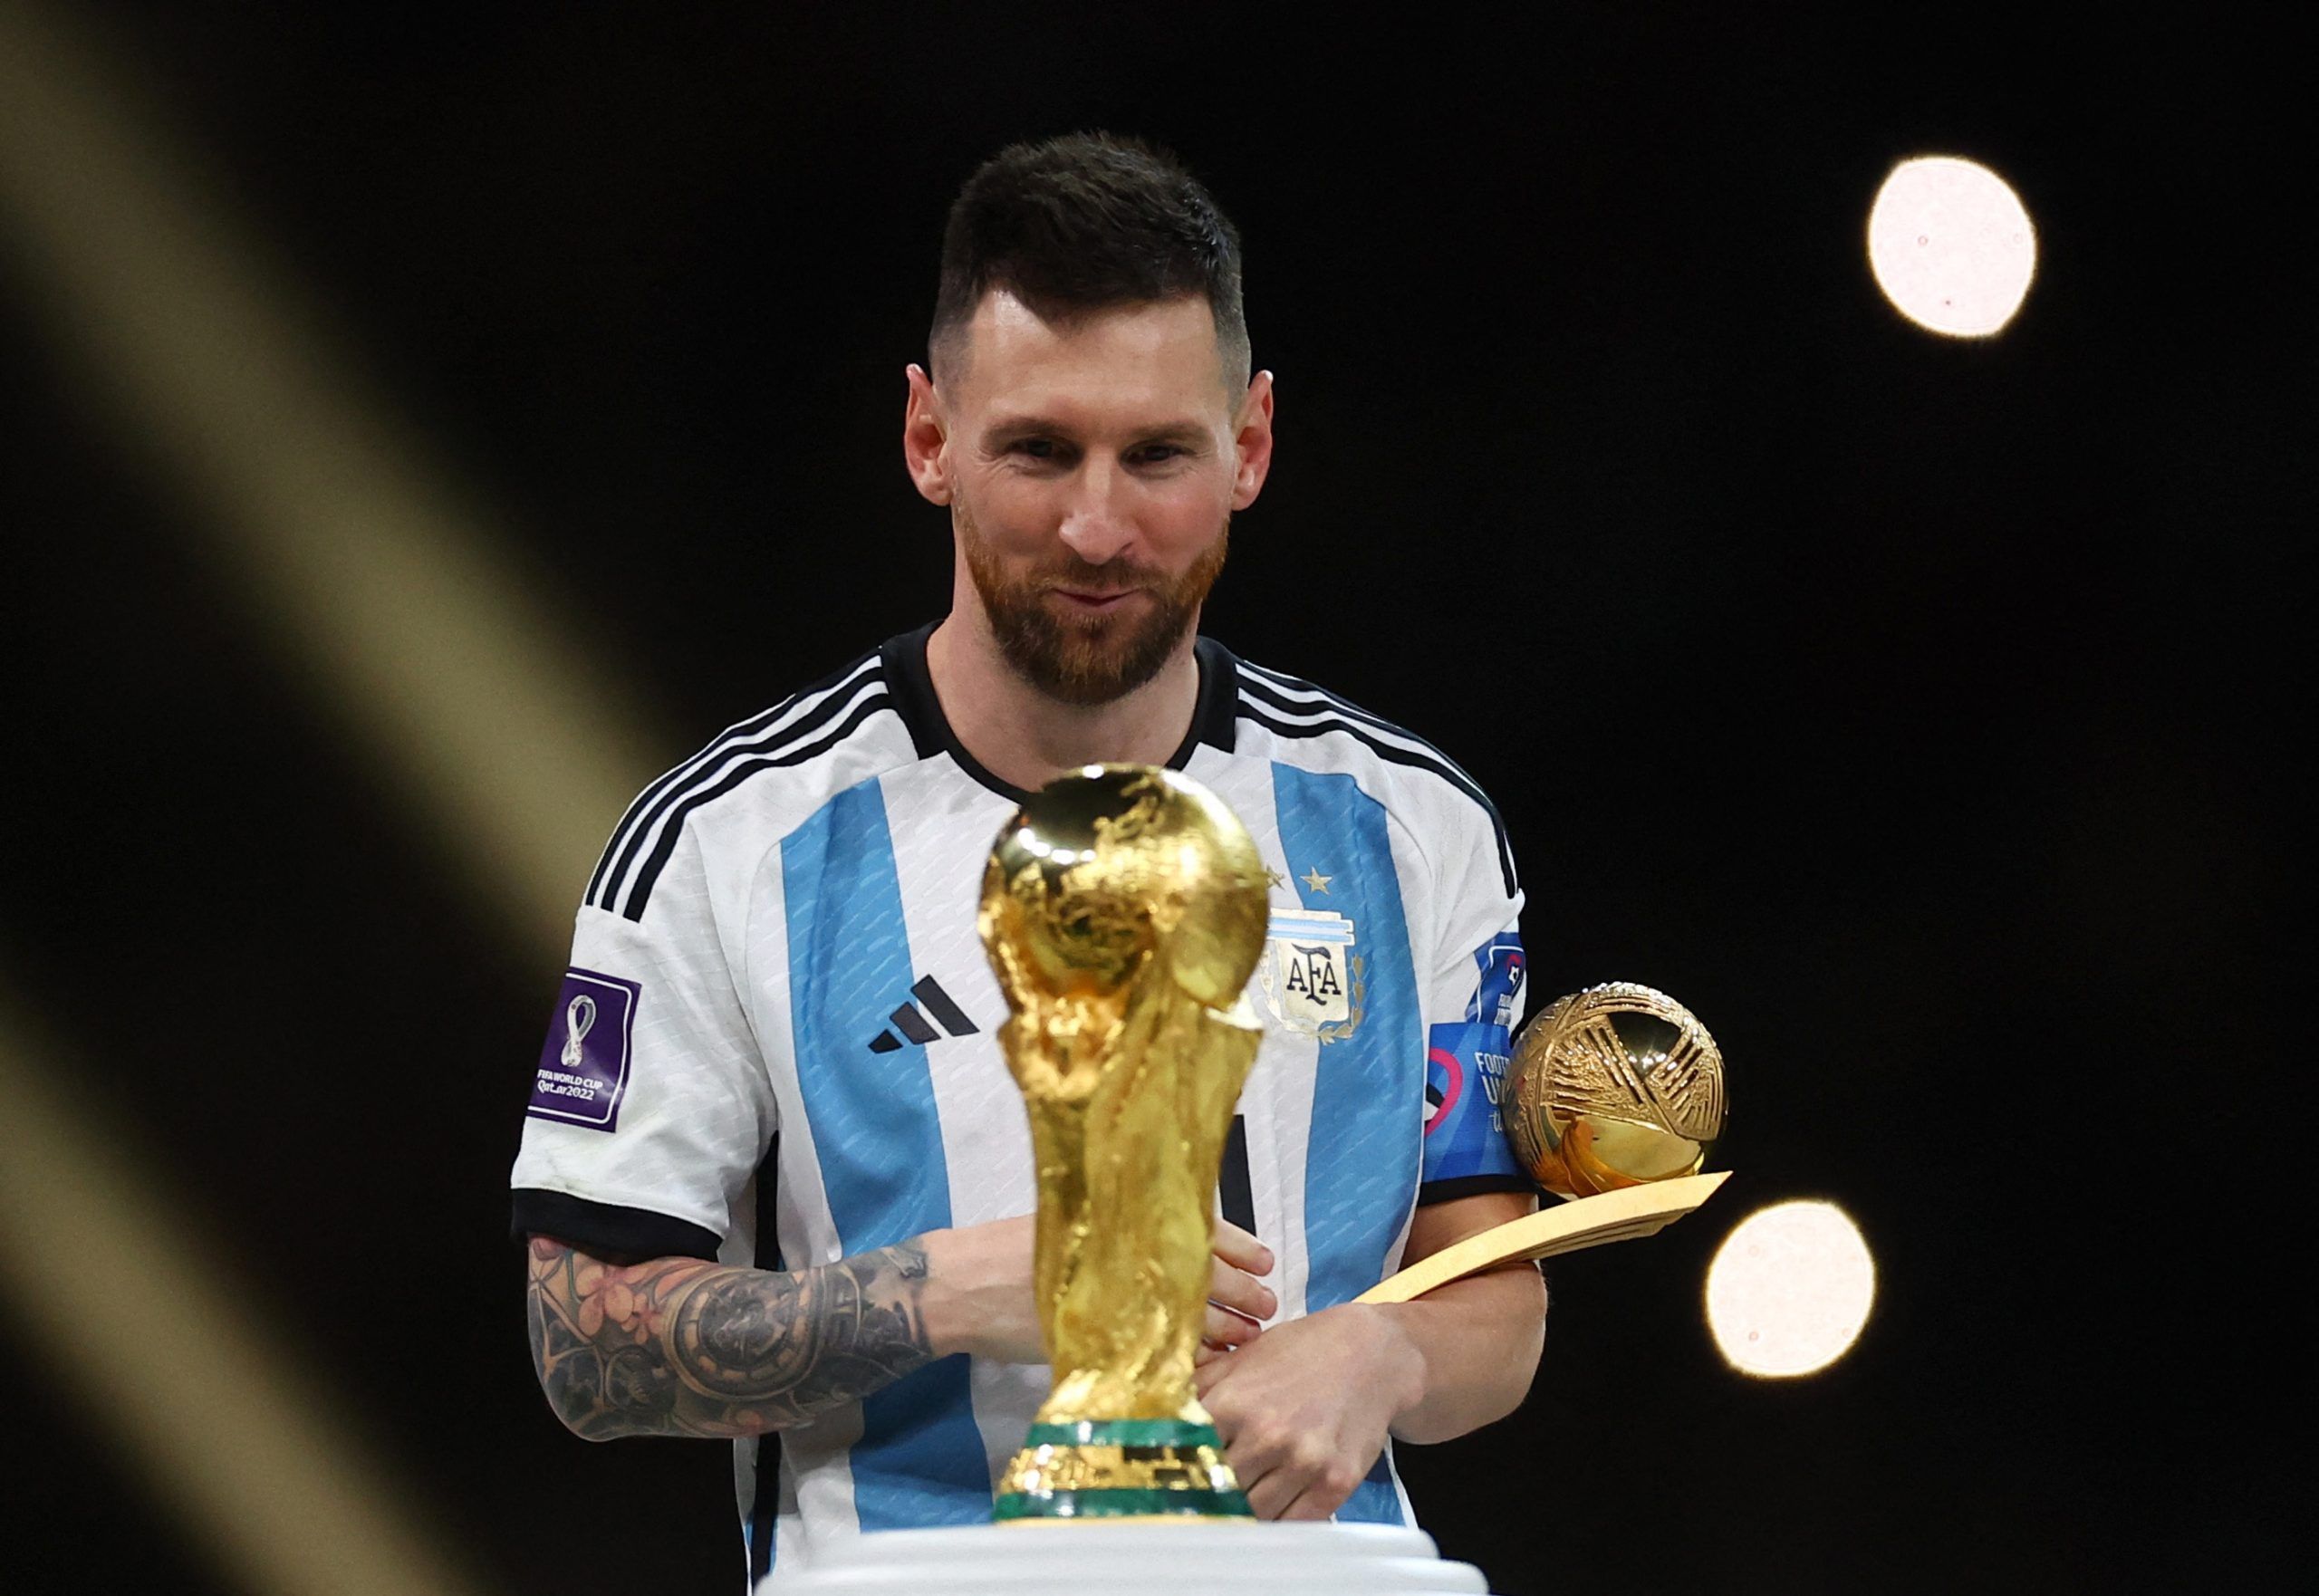 Does Messi Have This Trophy?” - Streaming Sensation IShowSpeed